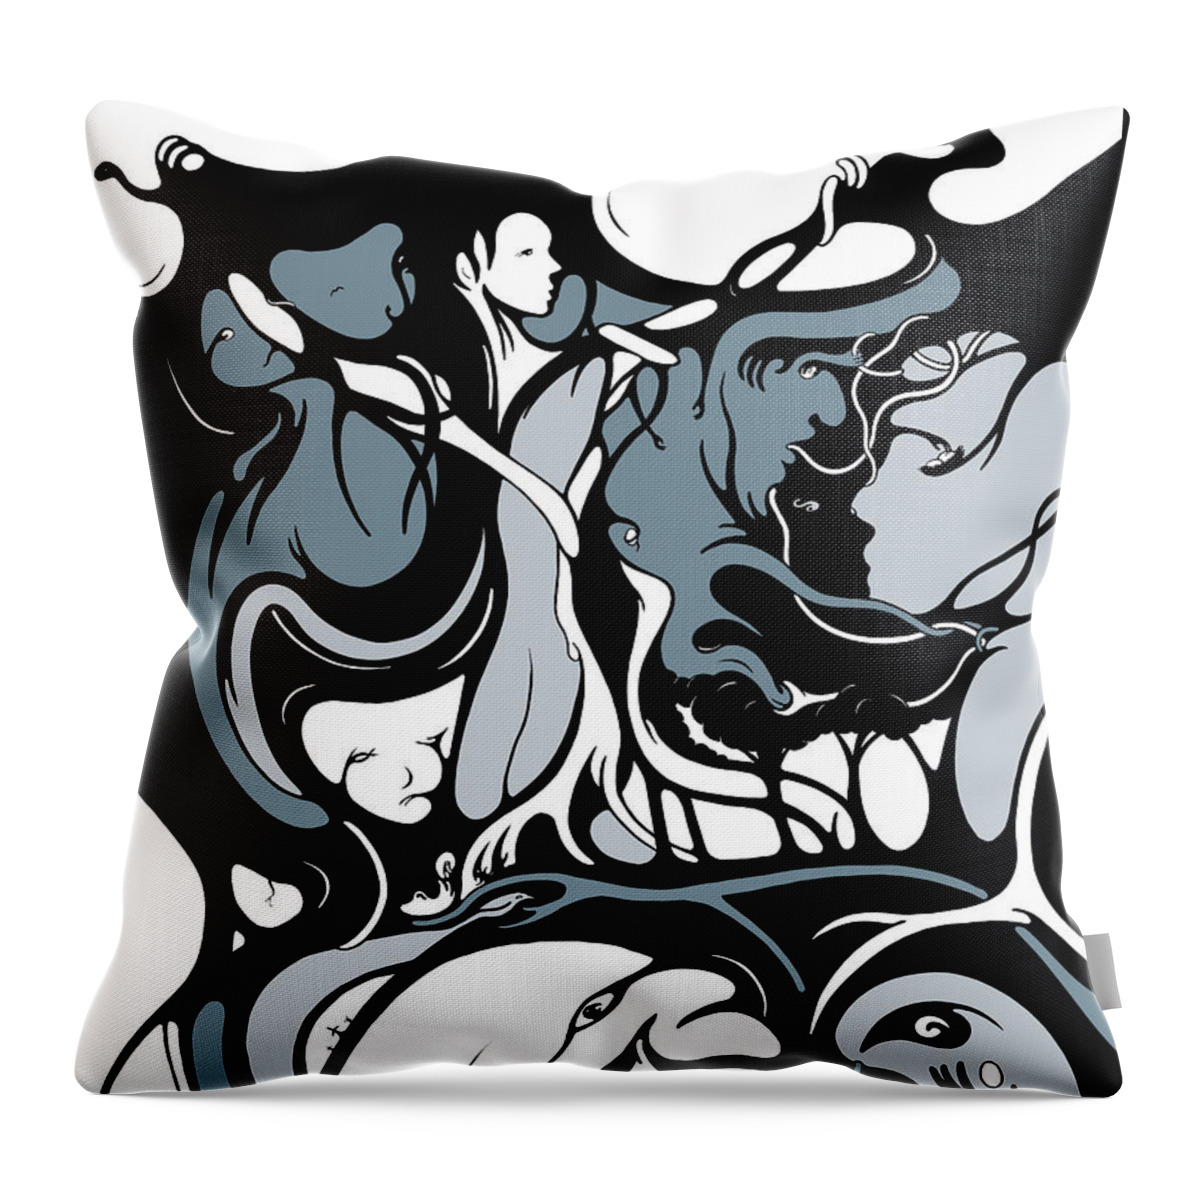 Female Throw Pillow featuring the digital art Foresight by Craig Tilley